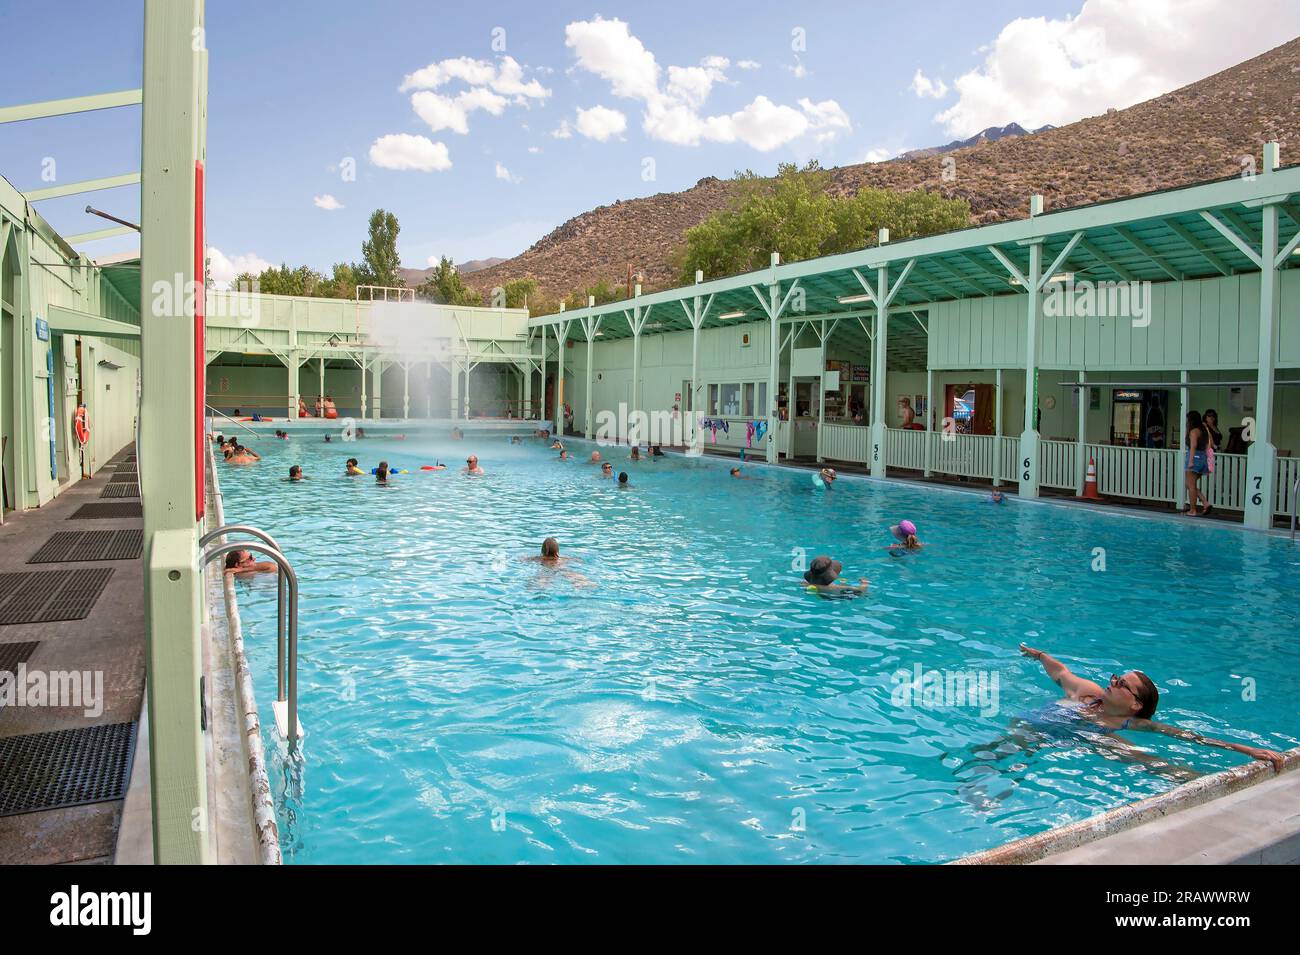 People enjoying the hot mineral water in a pool at Keough Hot Springs built in 1918 near Bishop, California, USA Stock Photo